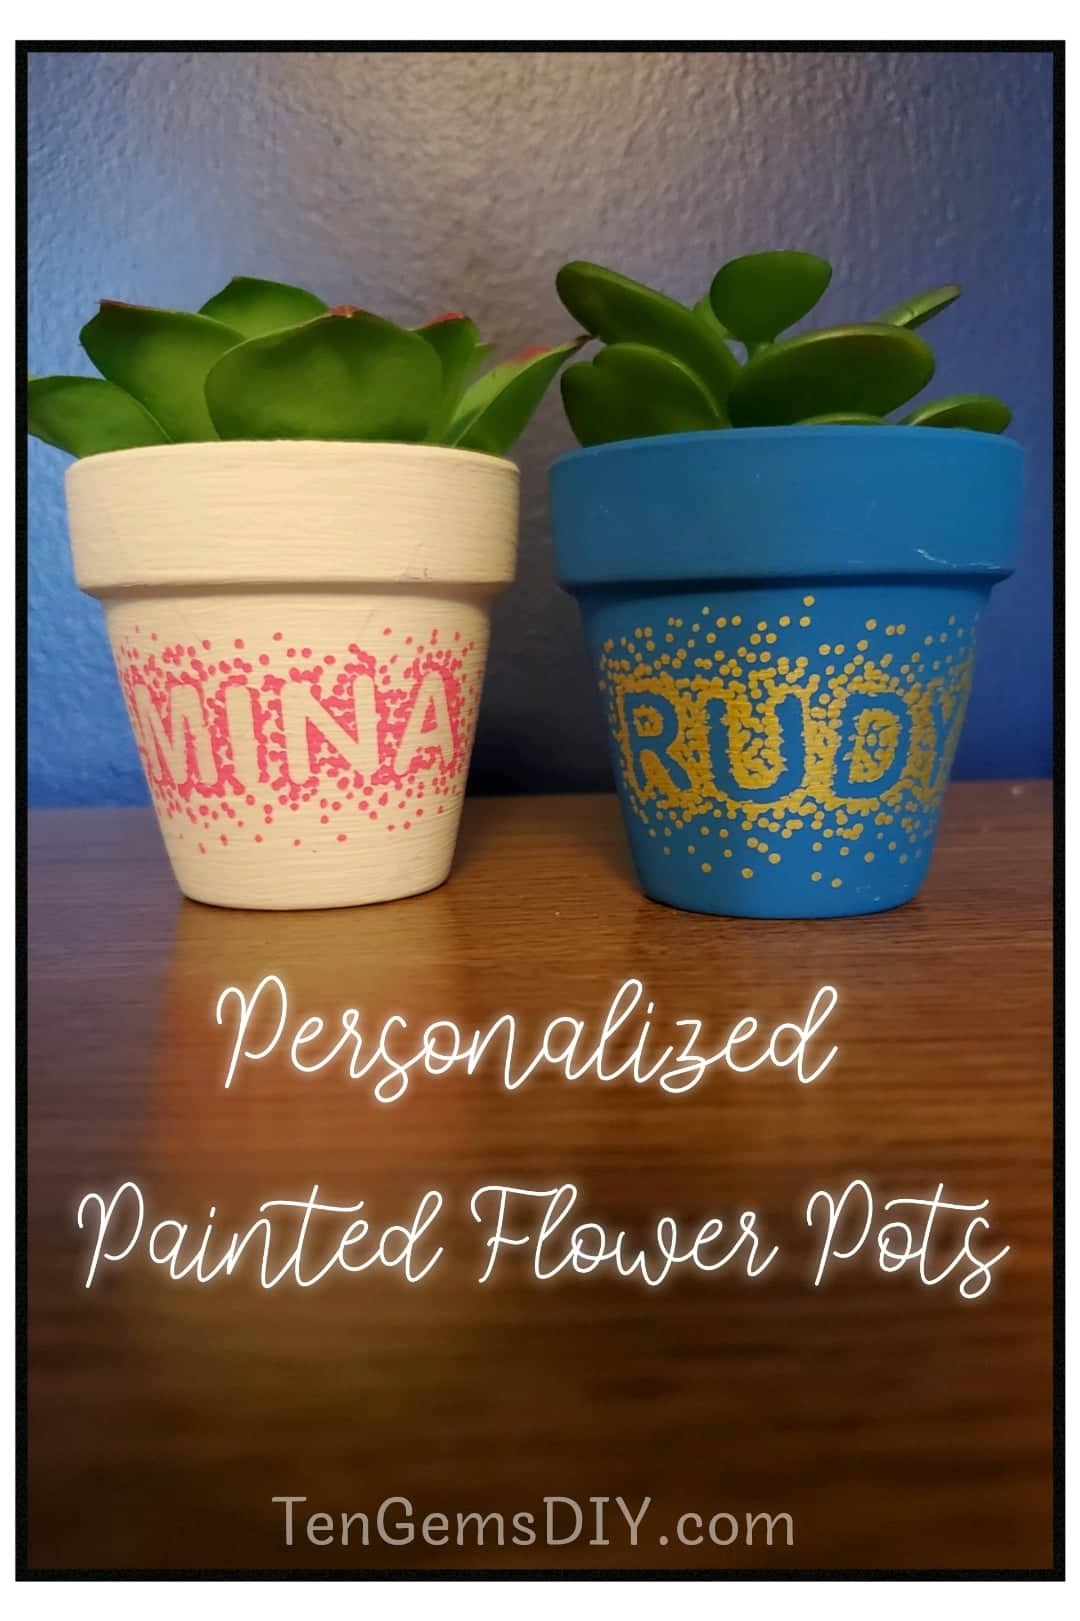 Personalized Painted Flower Pots